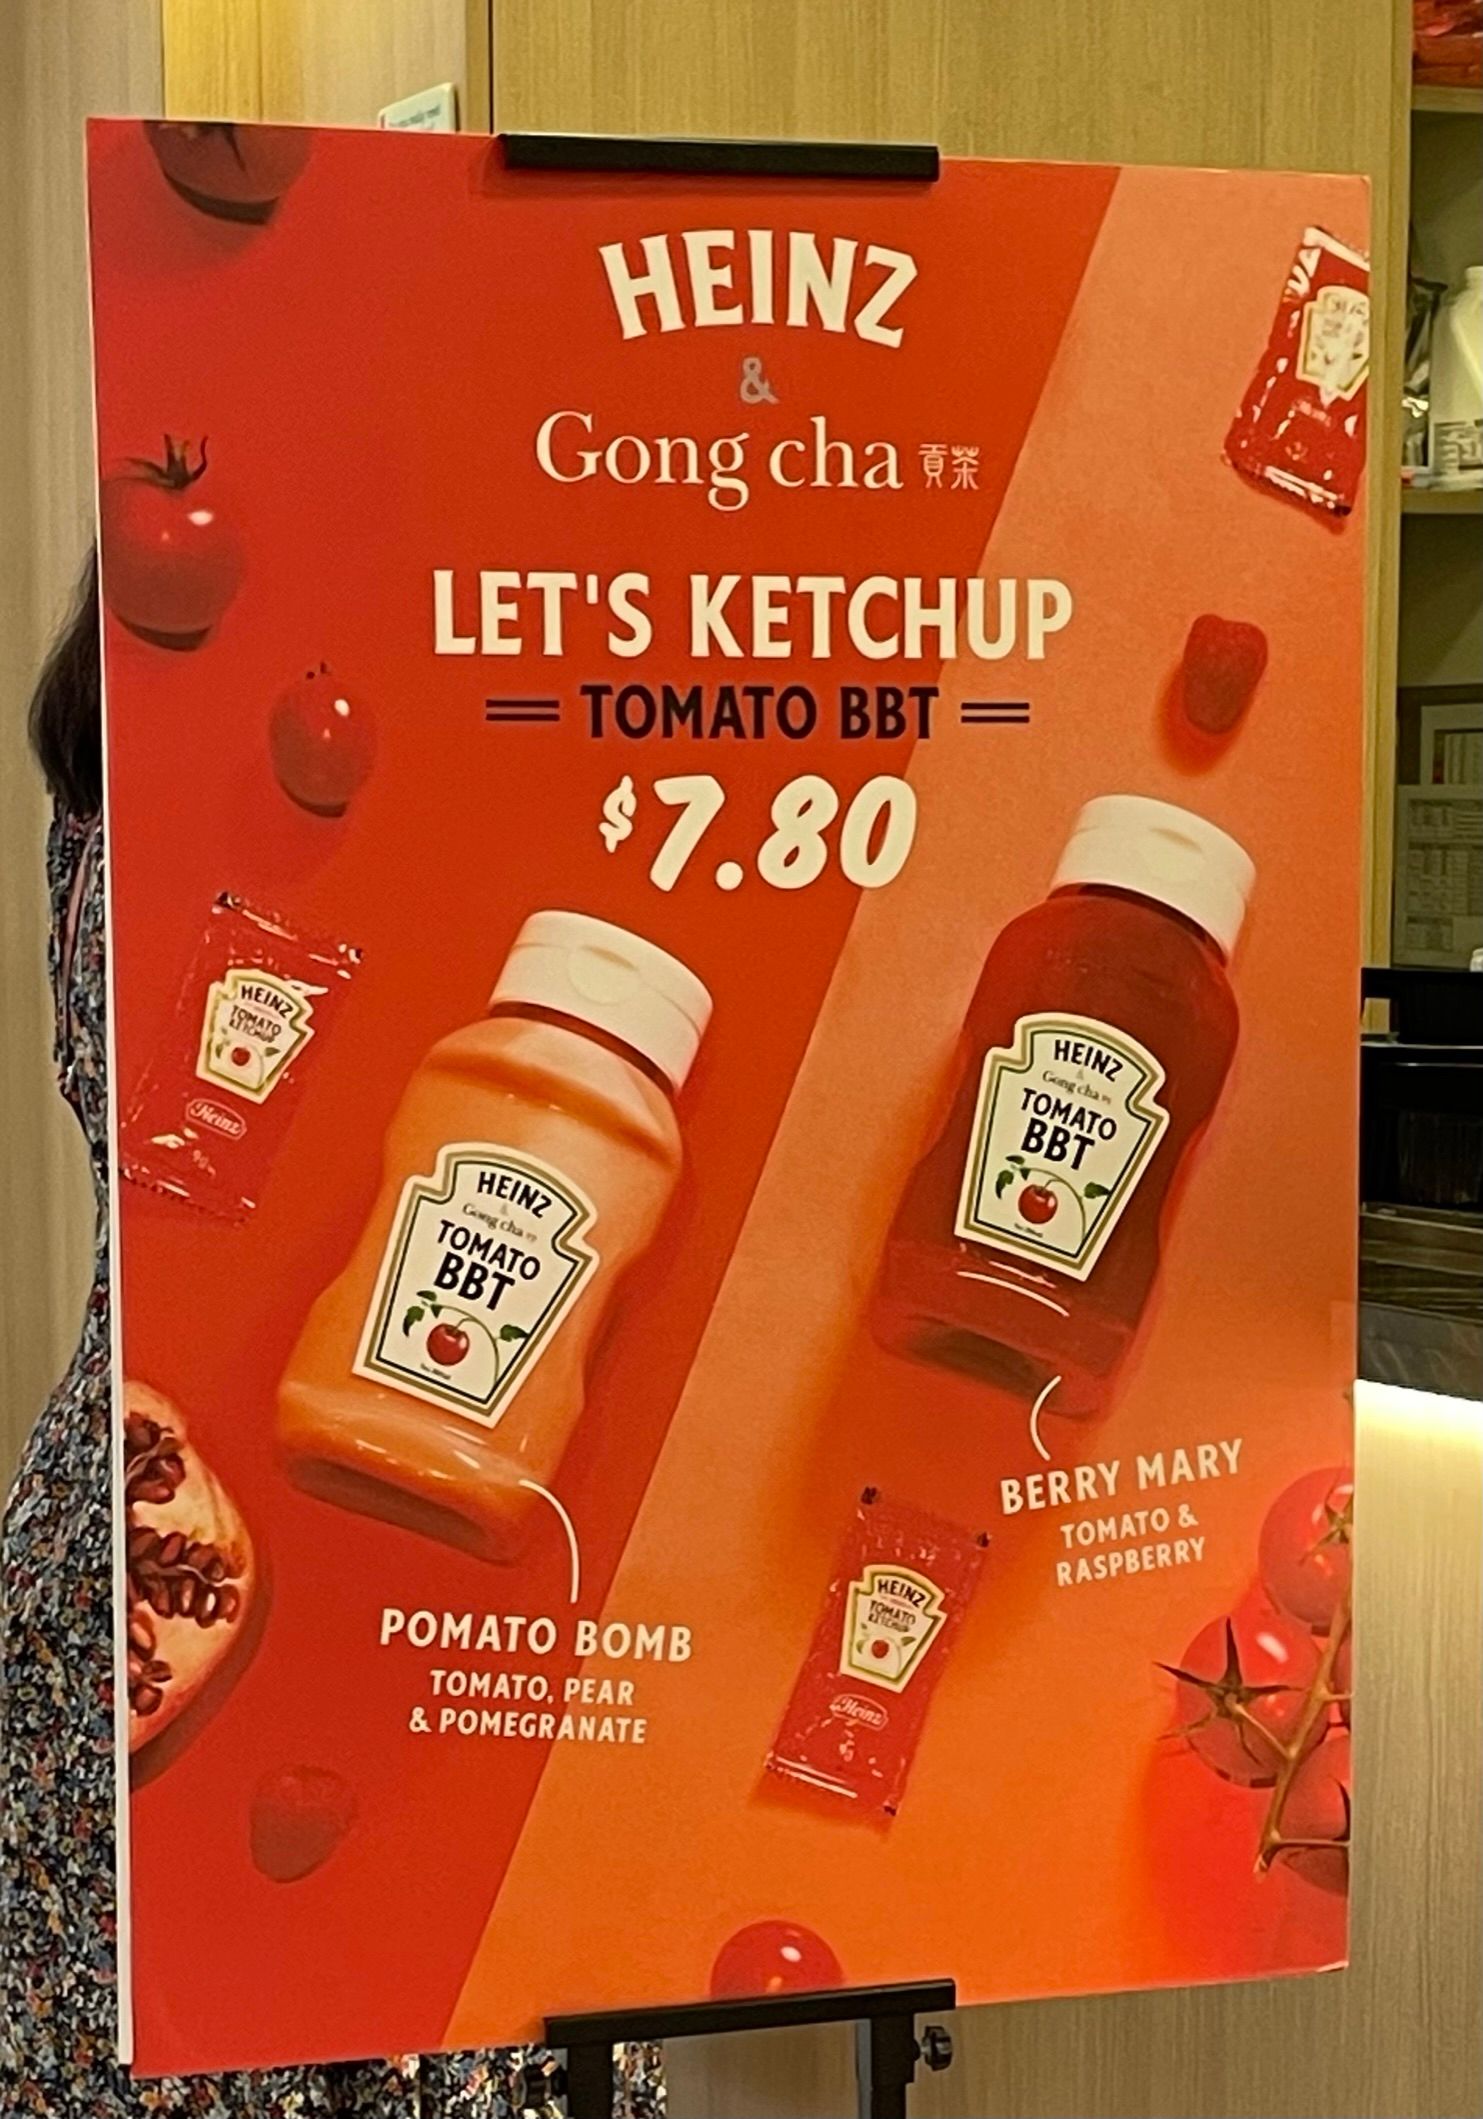 A red poster advertising a tie-up between Gong Cha and Heinz. They are offering two flavours of tomato bubble tea.